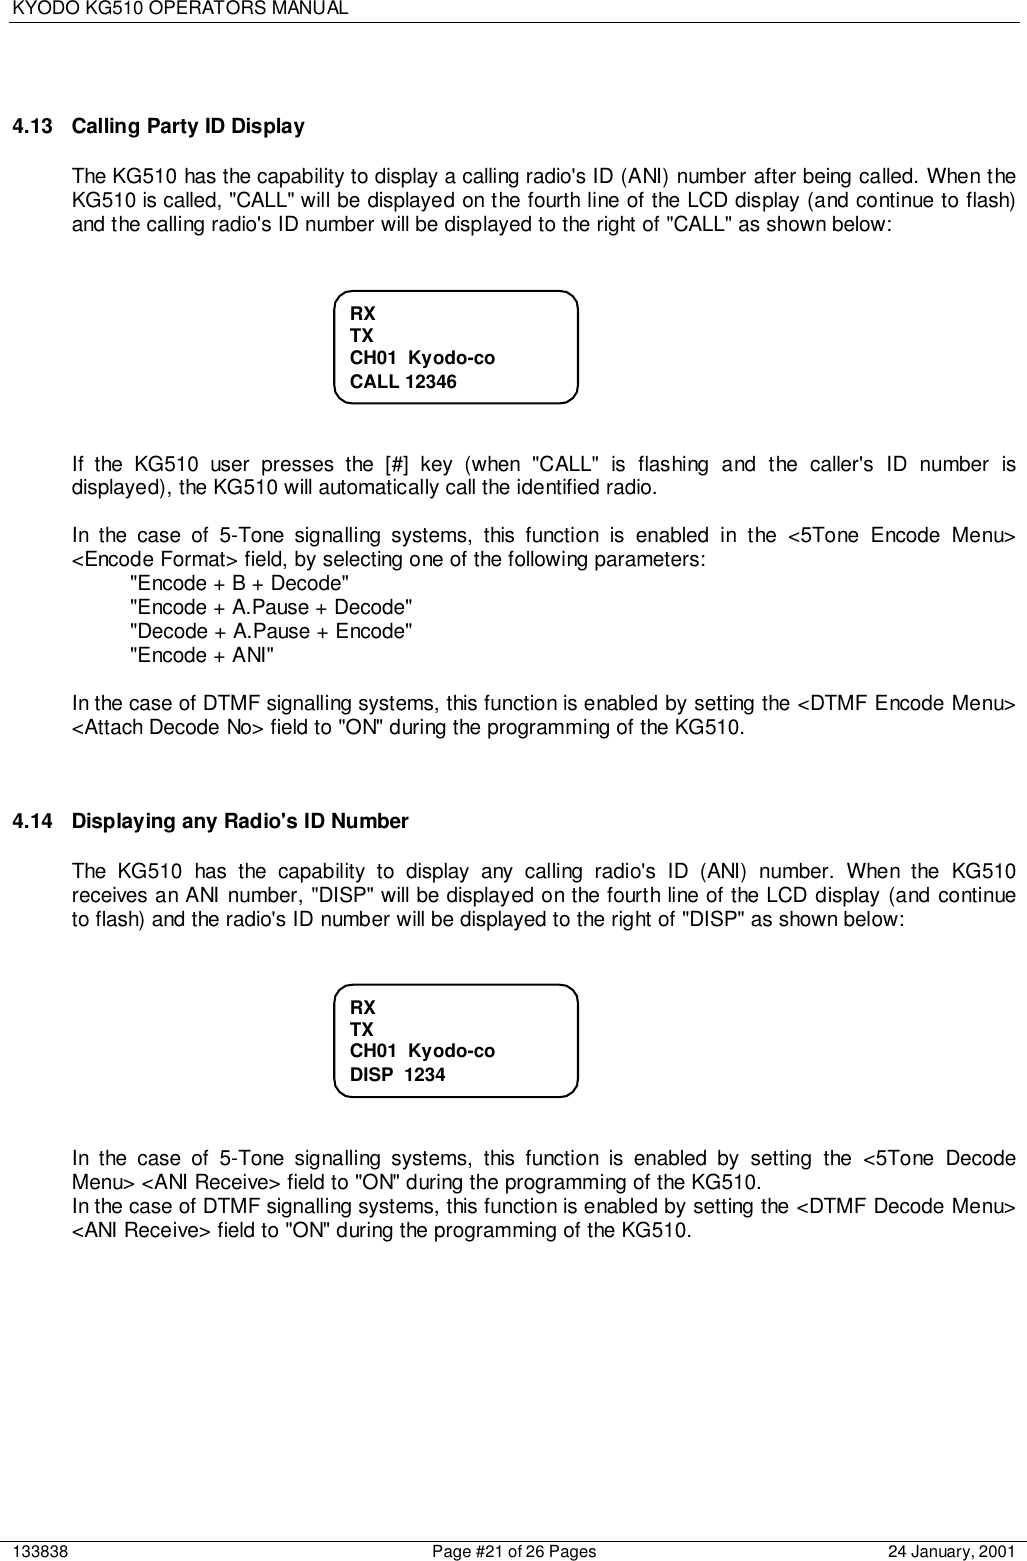 KYODO KG510 OPERATORS MANUAL133838 Page #21 of 26 Pages 24 January, 20014.13  Calling Party ID DisplayThe KG510 has the capability to display a calling radio&apos;s ID (ANI) number after being called. When theKG510 is called, &quot;CALL&quot; will be displayed on the fourth line of the LCD display (and continue to flash)and the calling radio&apos;s ID number will be displayed to the right of &quot;CALL&quot; as shown below:If the KG510 user presses the [#] key (when &quot;CALL&quot; is flashing and the caller&apos;s ID number isdisplayed), the KG510 will automatically call the identified radio.In the case of 5-Tone signalling systems, this function is enabled in the &lt;5Tone Encode Menu&gt;&lt;Encode Format&gt; field, by selecting one of the following parameters:&quot;Encode + B + Decode&quot;&quot;Encode + A.Pause + Decode&quot;&quot;Decode + A.Pause + Encode&quot;&quot;Encode + ANI&quot;In the case of DTMF signalling systems, this function is enabled by setting the &lt;DTMF Encode Menu&gt;&lt;Attach Decode No&gt; field to &quot;ON&quot; during the programming of the KG510.4.14  Displaying any Radio&apos;s ID NumberThe KG510 has the capability to display any calling radio&apos;s ID (ANI) number. When the KG510receives an ANI number, &quot;DISP&quot; will be displayed on the fourth line of the LCD display (and continueto flash) and the radio&apos;s ID number will be displayed to the right of &quot;DISP&quot; as shown below:In the case of 5-Tone signalling systems, this function is enabled by setting the &lt;5Tone DecodeMenu&gt; &lt;ANI Receive&gt; field to &quot;ON&quot; during the programming of the KG510.In the case of DTMF signalling systems, this function is enabled by setting the &lt;DTMF Decode Menu&gt;&lt;ANI Receive&gt; field to &quot;ON&quot; during the programming of the KG510.RXTXCH01  Kyodo-coCALL 12346RXTXCH01  Kyodo-coDISP  1234